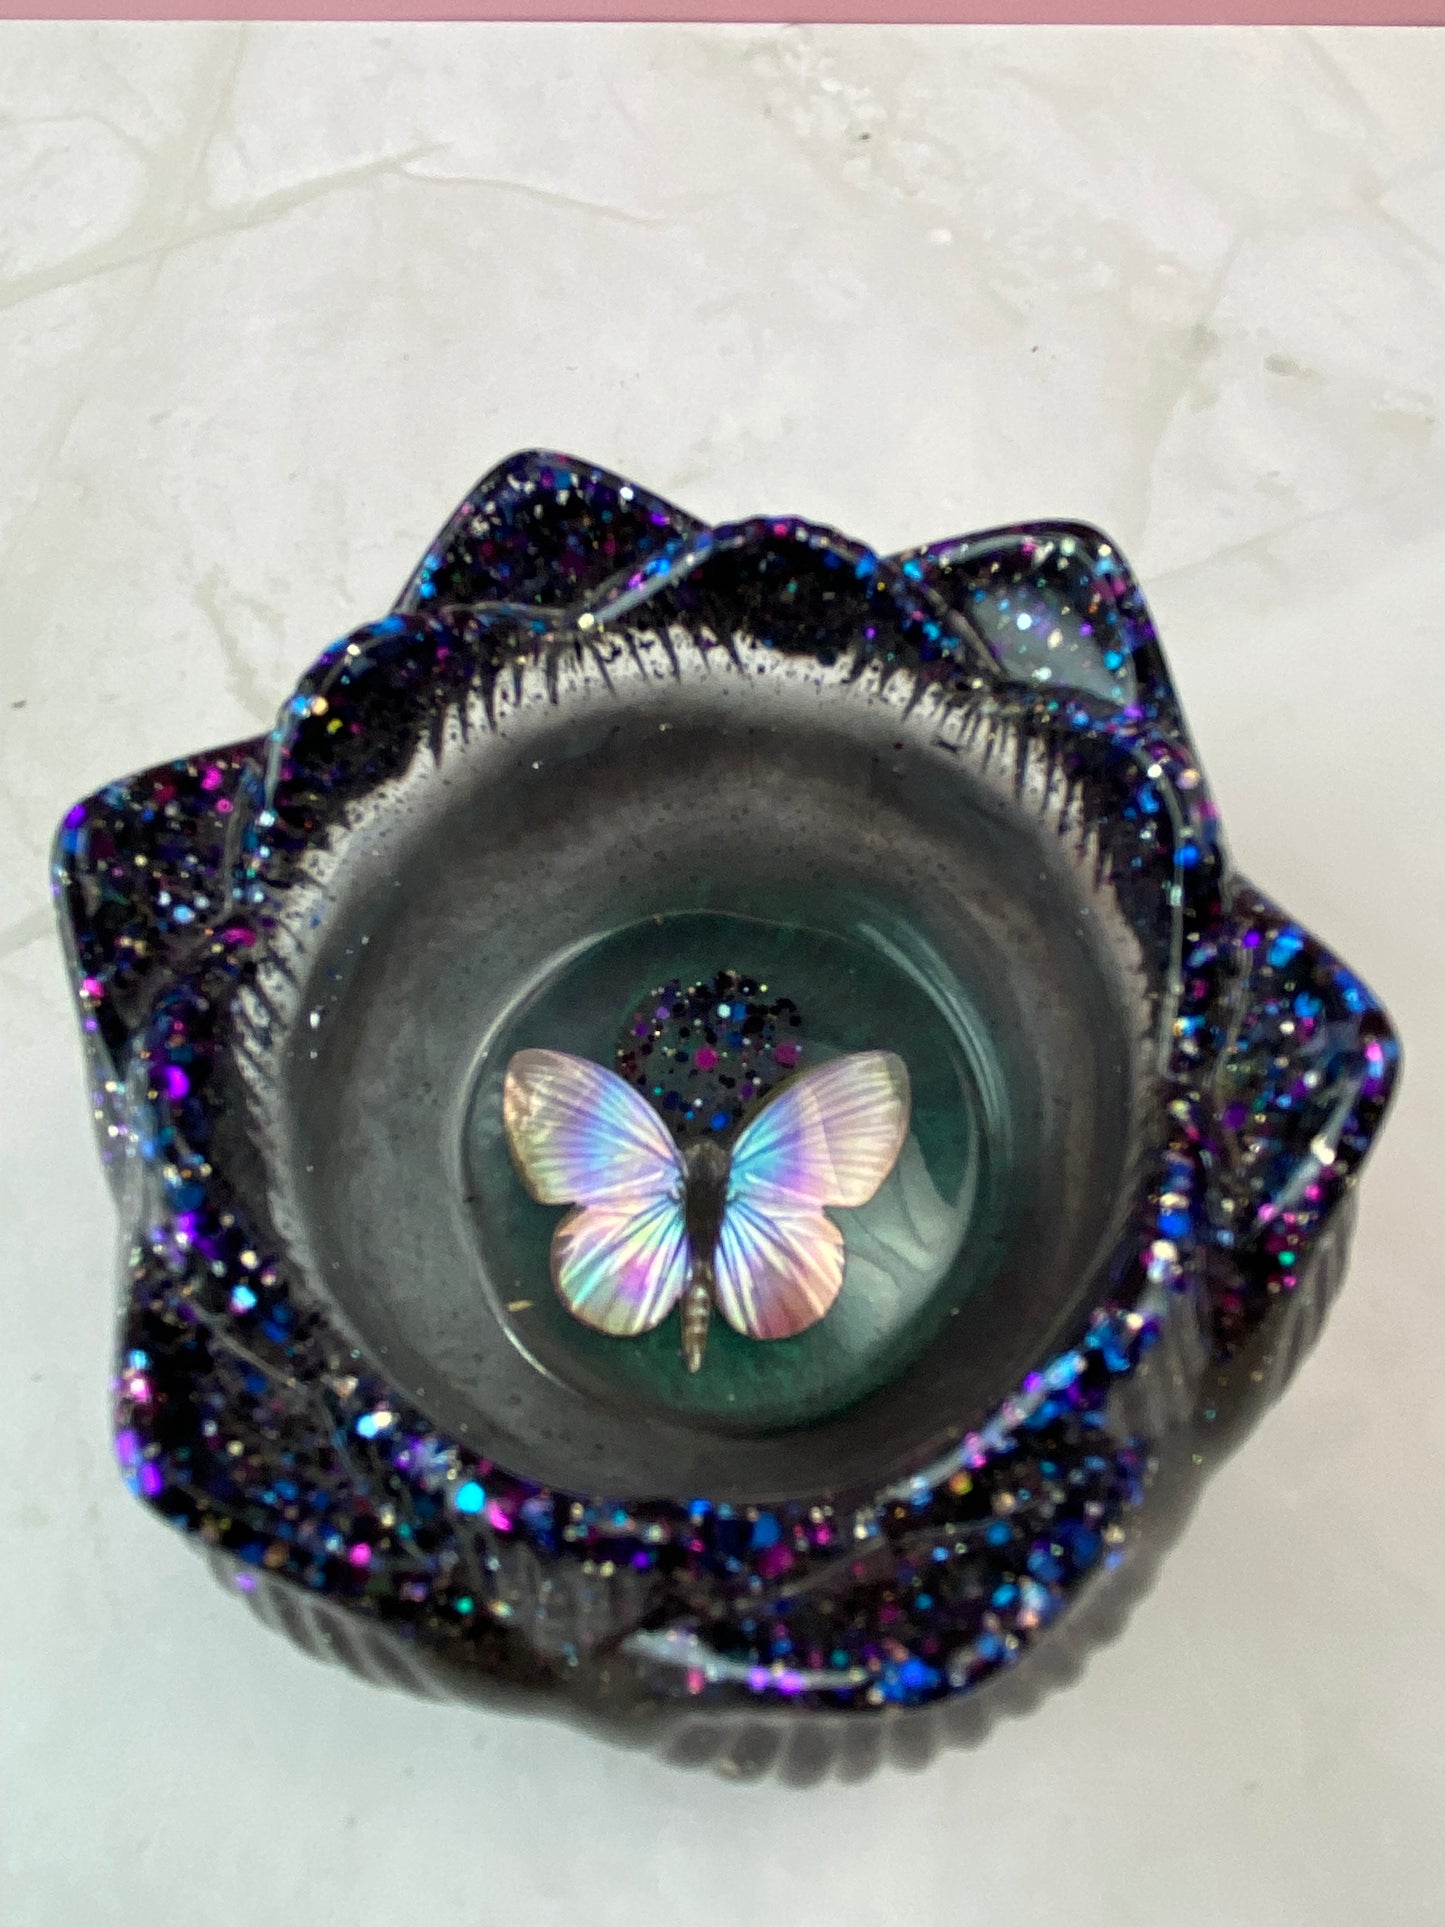 Teal Pearl & Black Glitter Butterfly Lotus Candle Holder | Handmade Home Decor